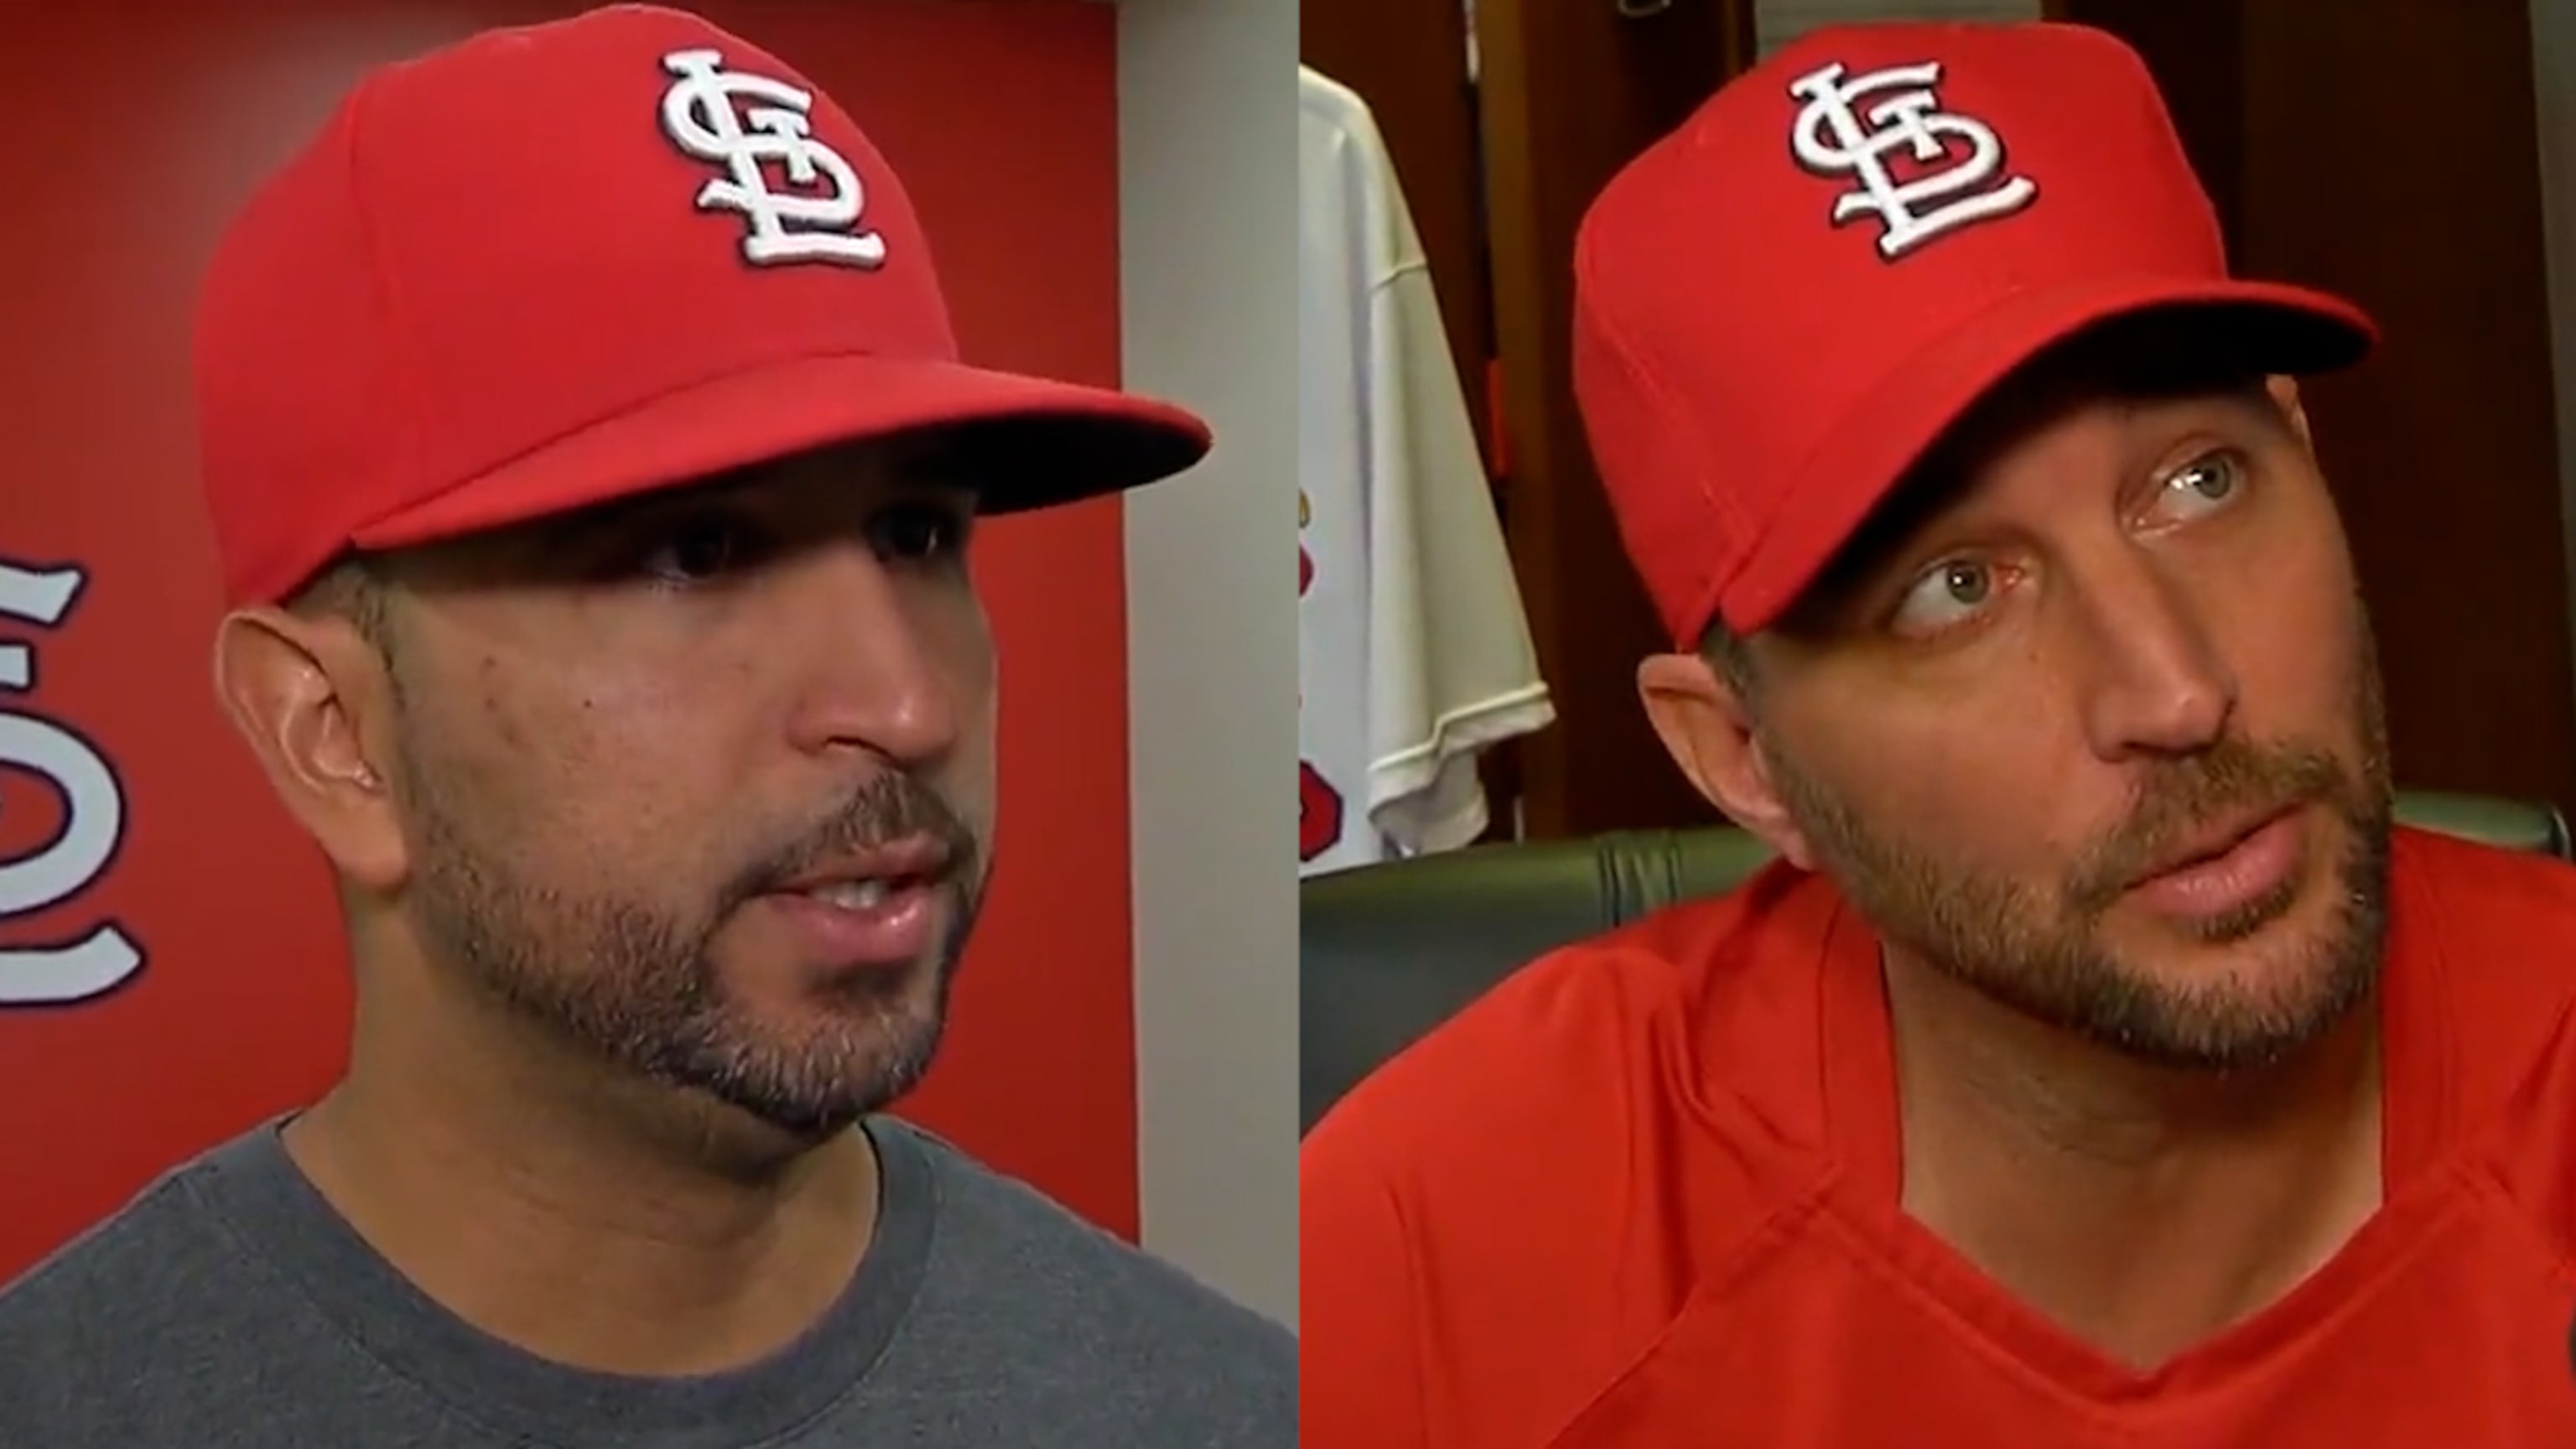 317 starts later, it's just like riding a bike for Waino and Yadi